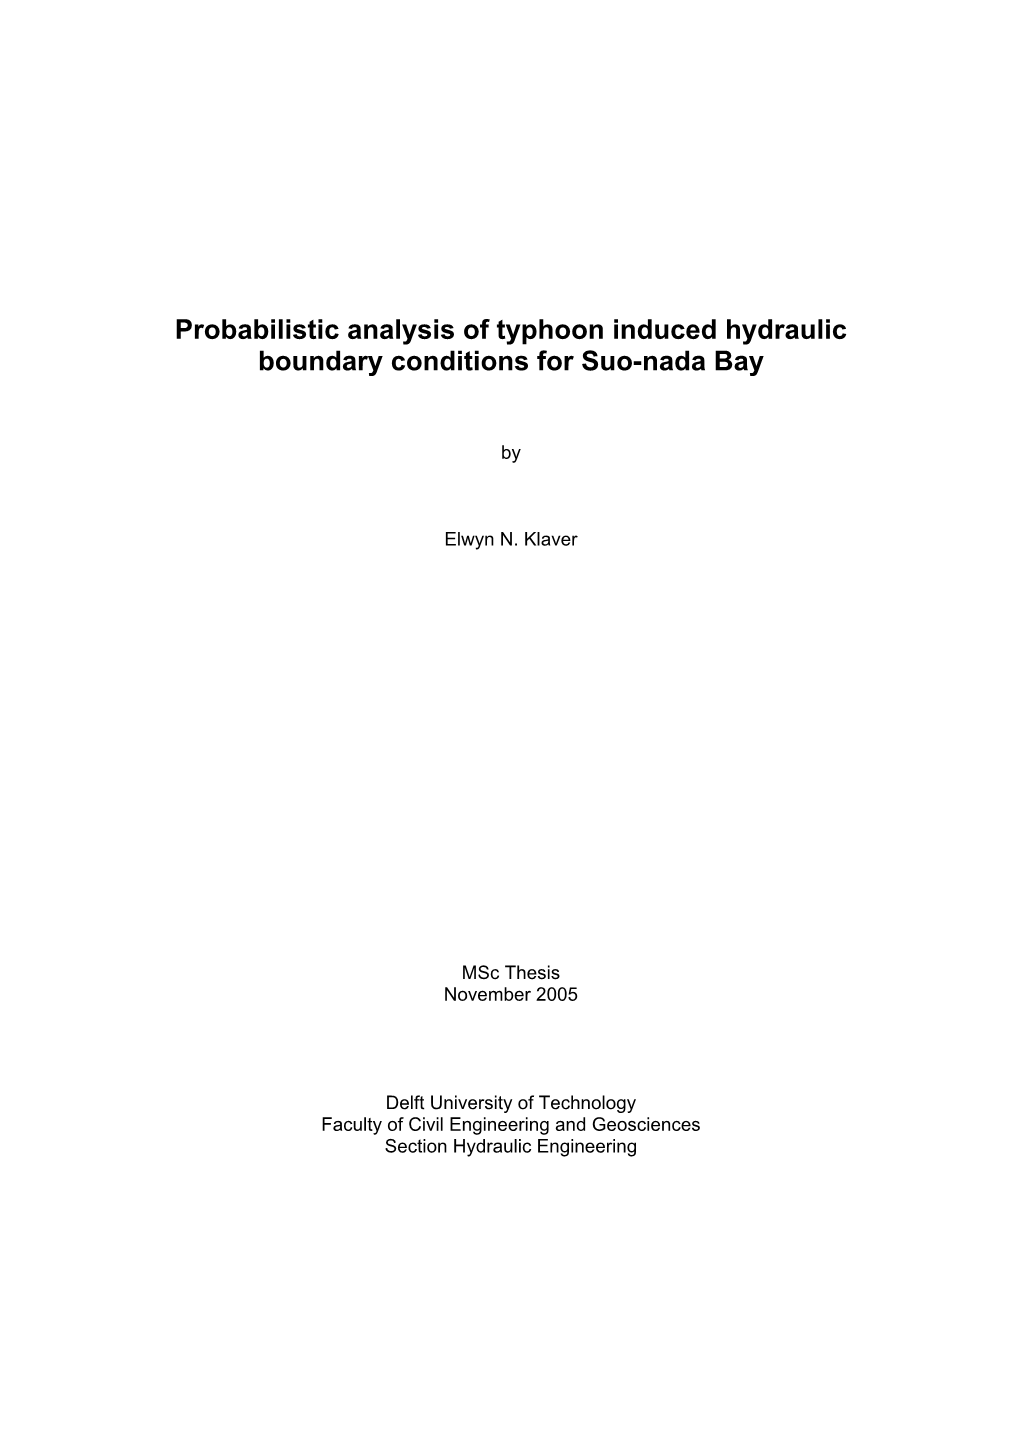 Probabilistic Analysis of Typhoon Induced Hydraulic Boundary Conditions for Suo-Nada Bay